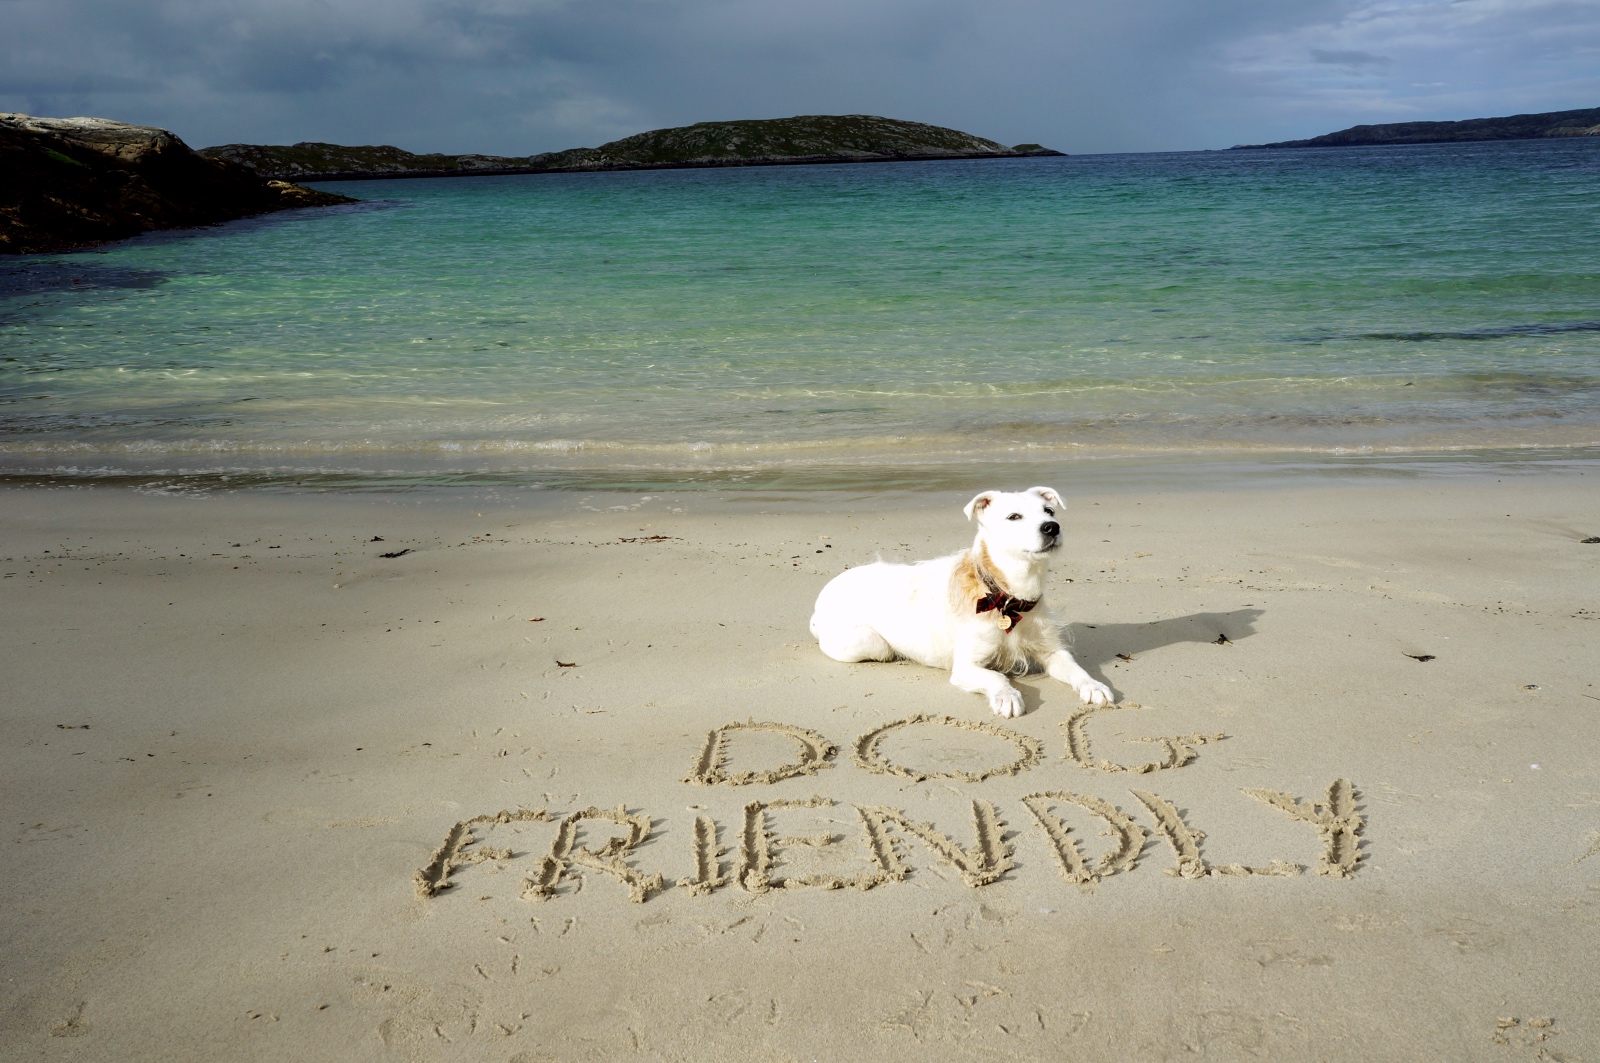 White terrier dog beside the sea with 'Dog Friendly' written in the sand